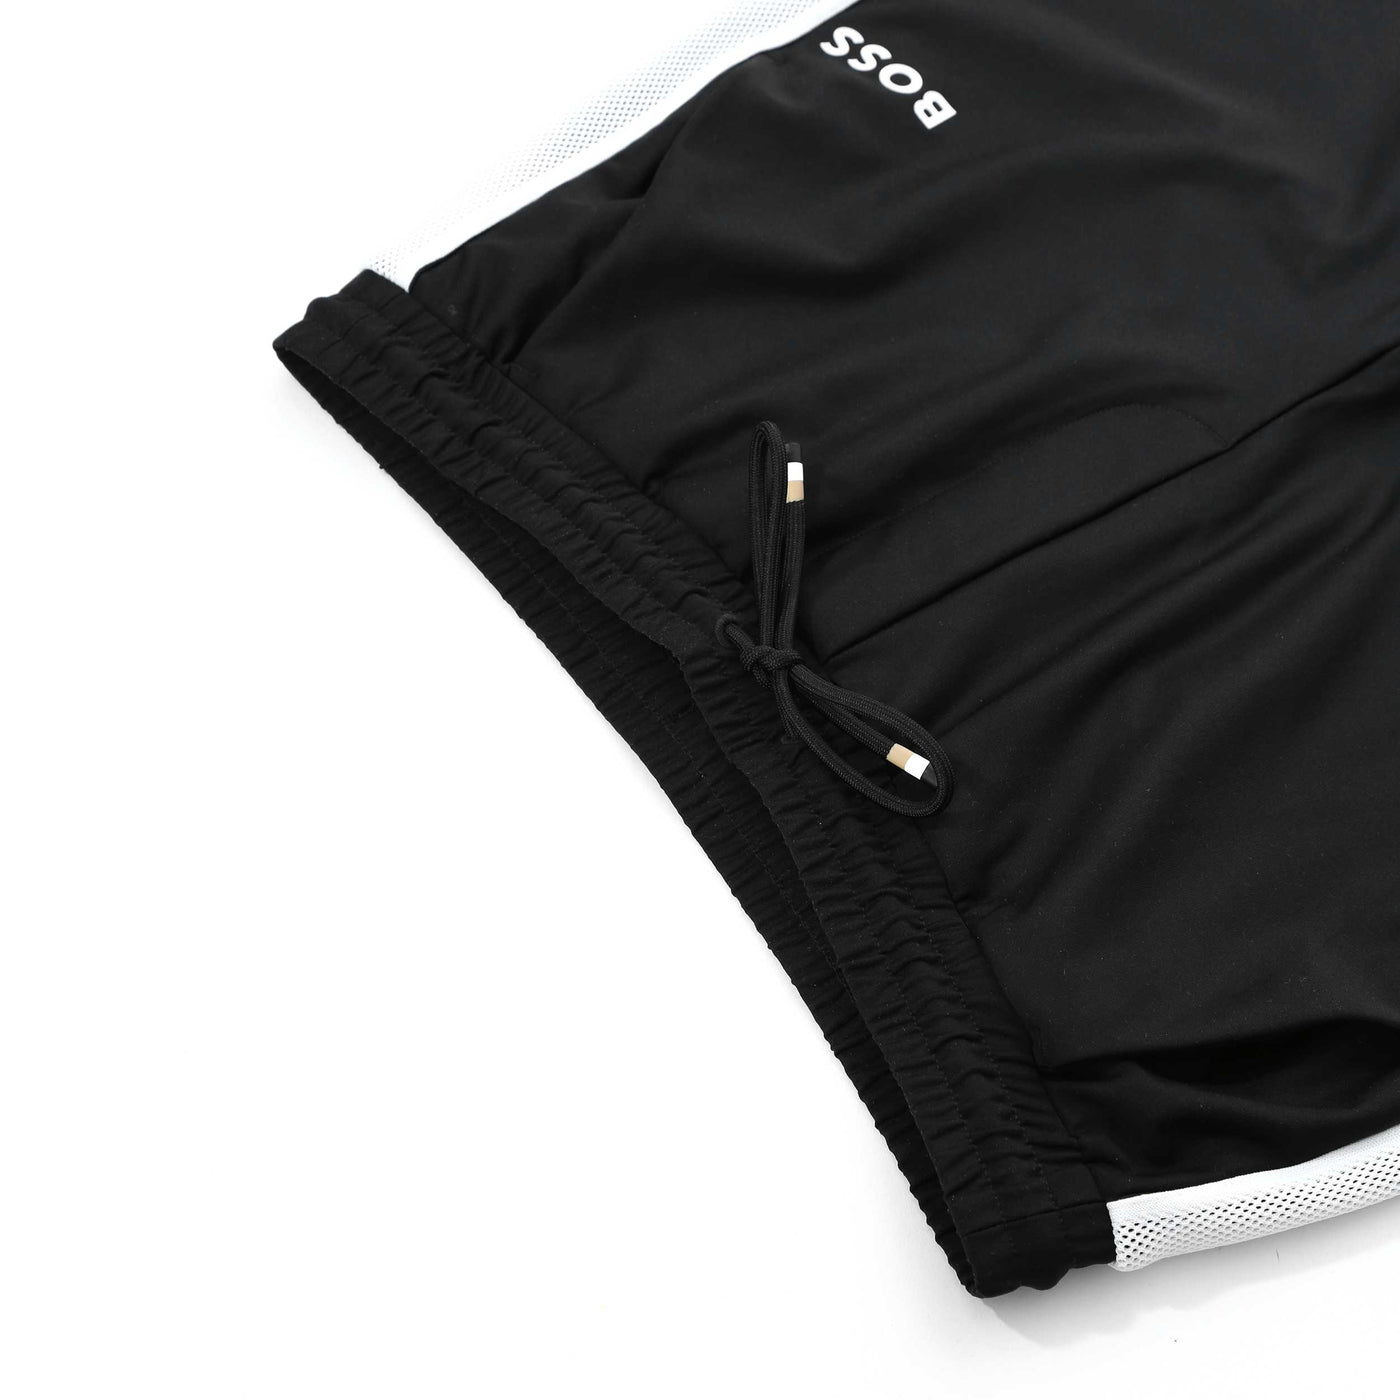 BOSS Hicon MB 2 Sweat Pant in Black Waist